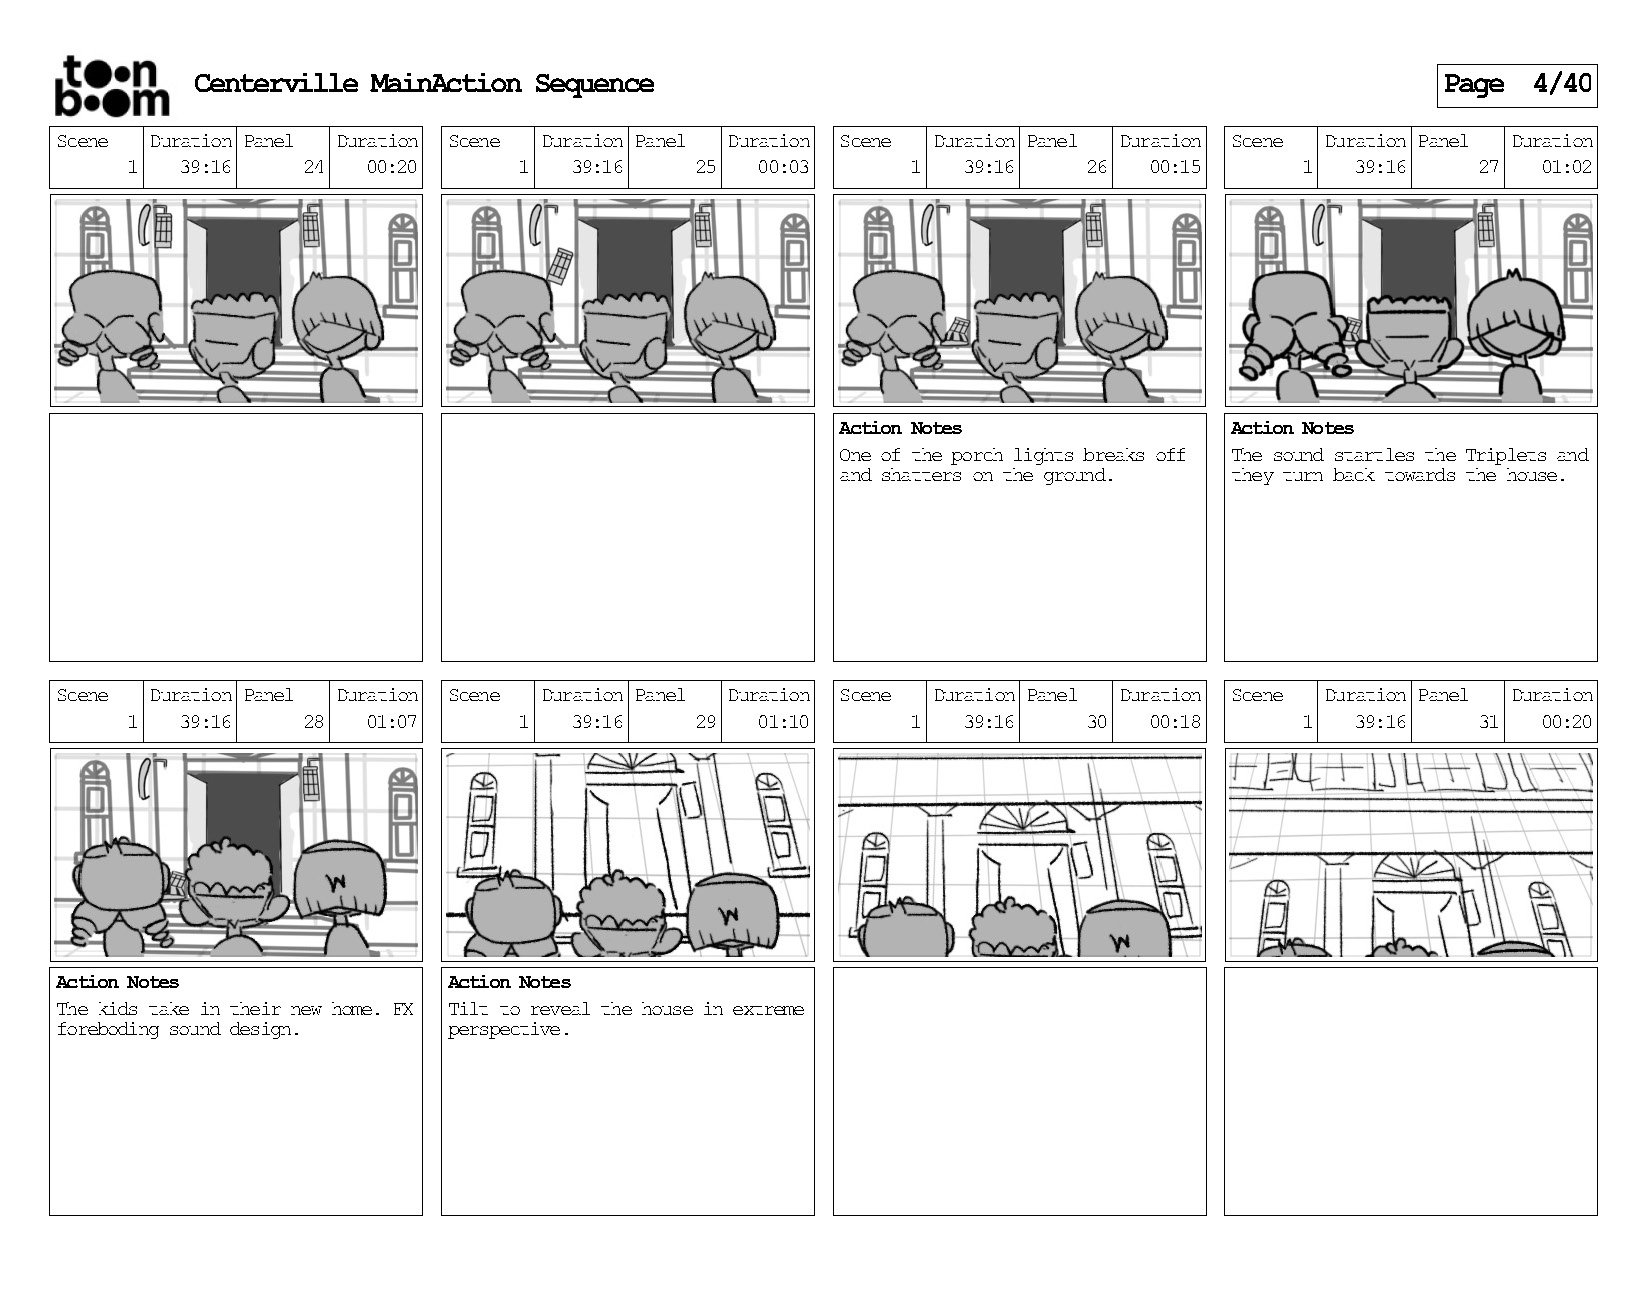 Centerville_movingInSequence_V05_Page_05.jpg